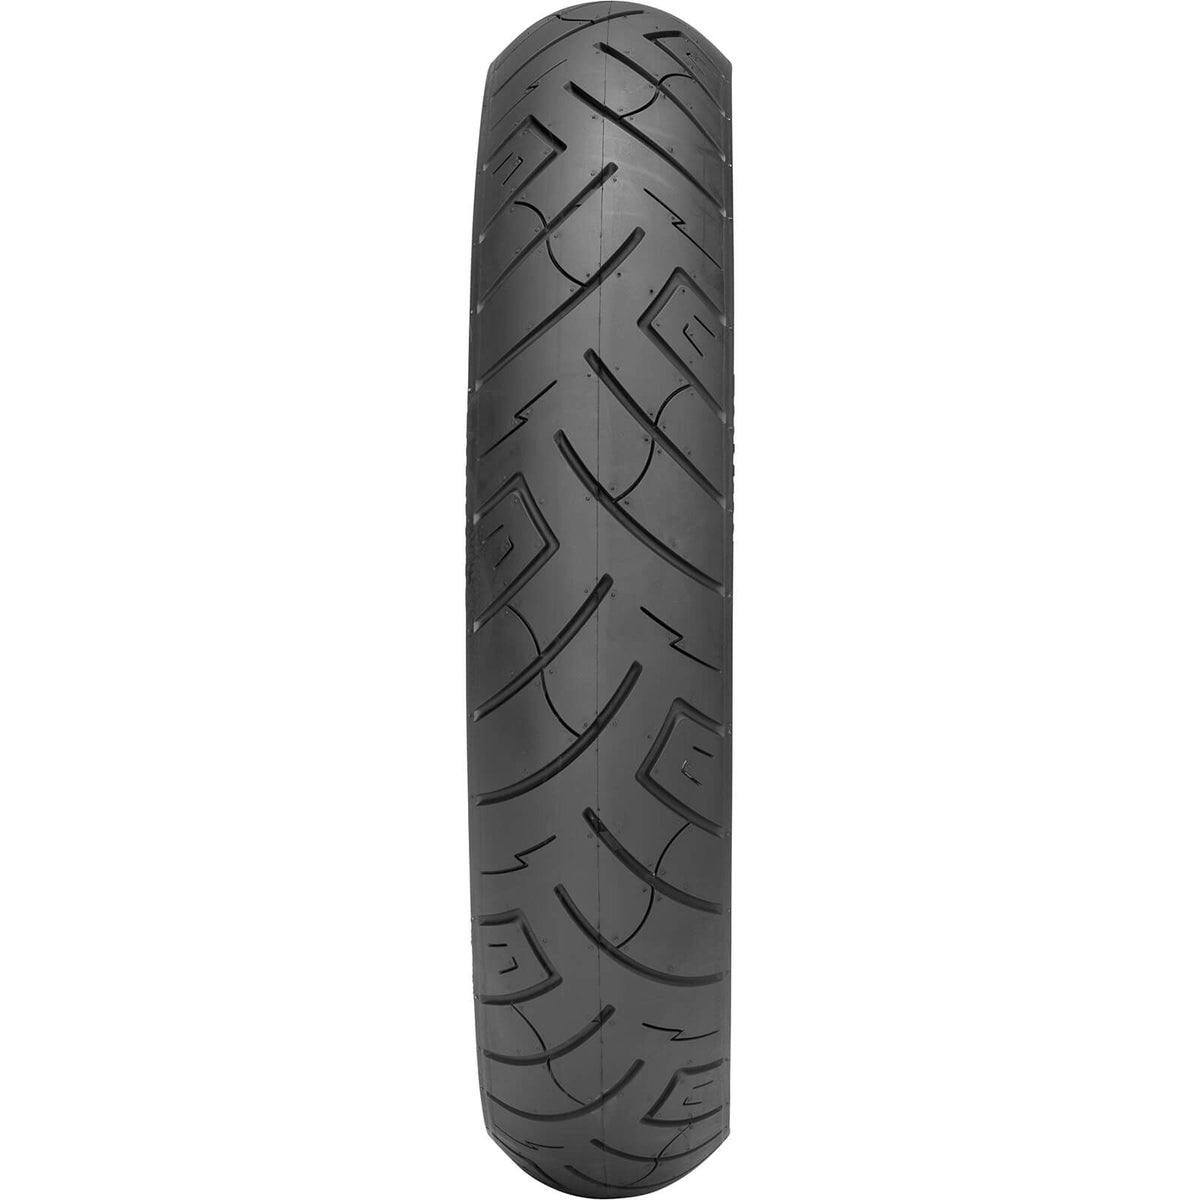 Shinko Motorcycle Tires SR777 Front Motorcycle Tire - 130/60-23 